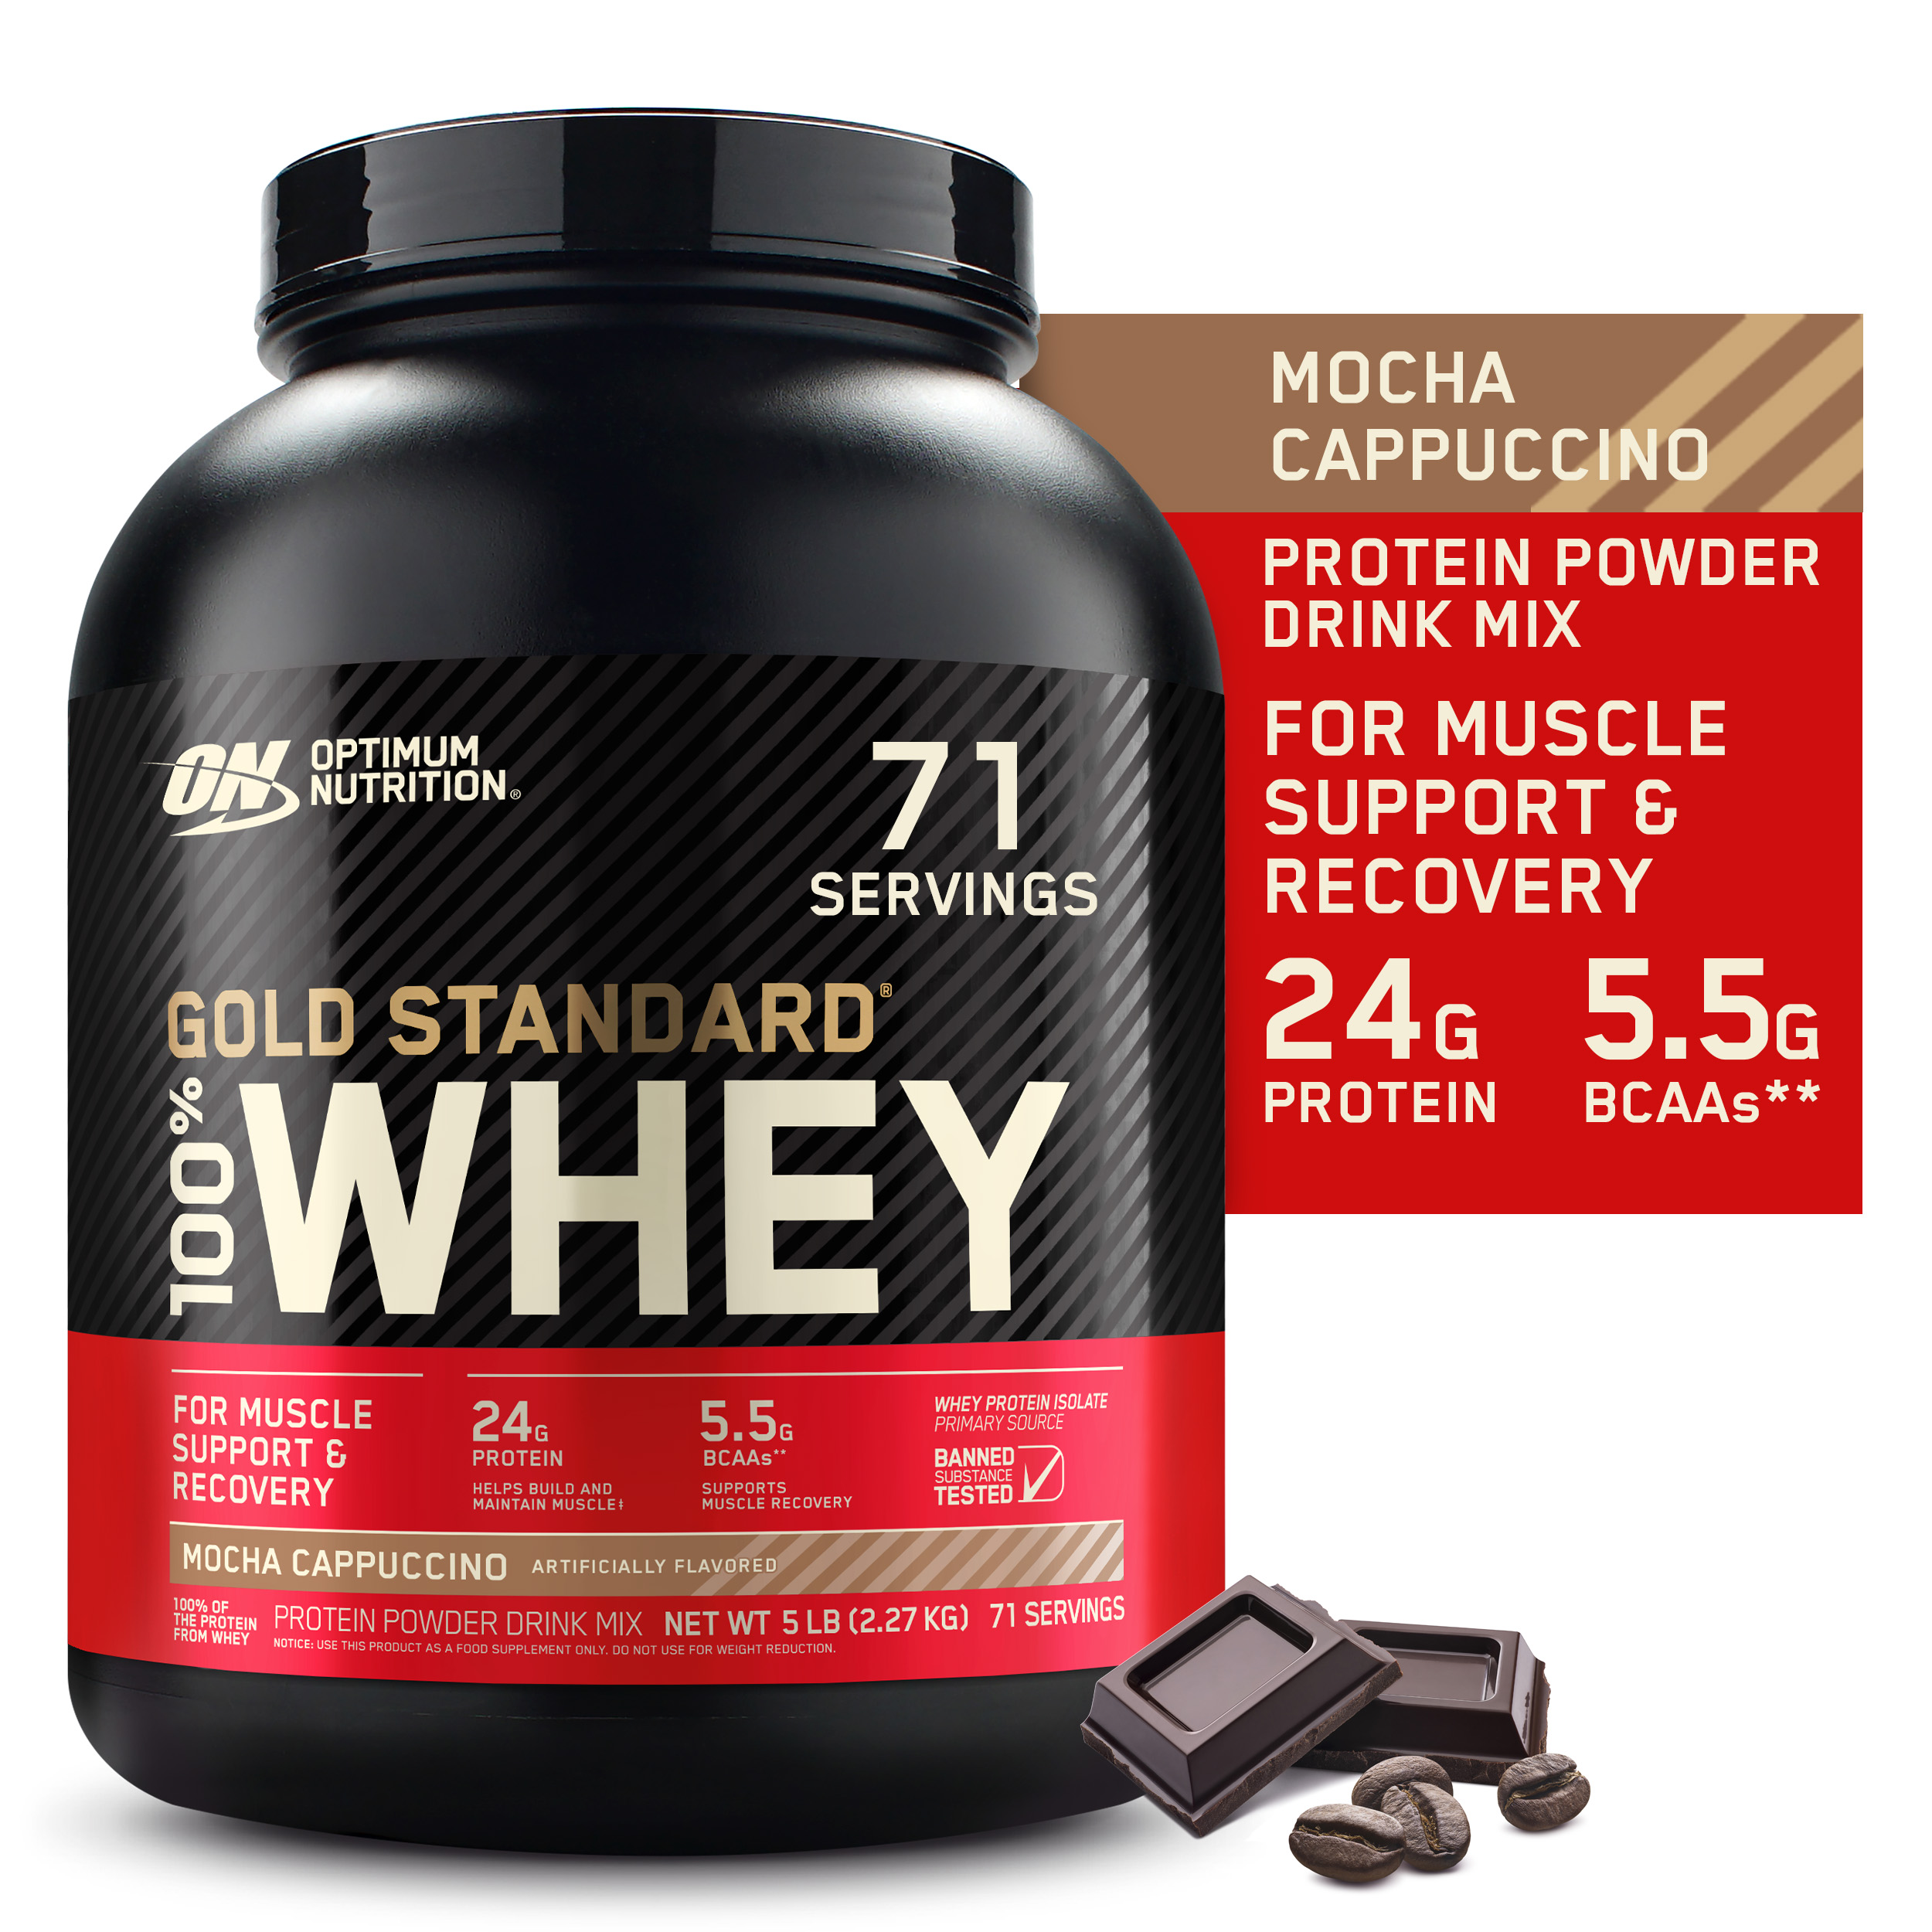 Optimum Nutrition, Gold Standard 100% Whey Protein Powder, Mocha Cappuccino, 5 lb, 71 Servings - image 1 of 10